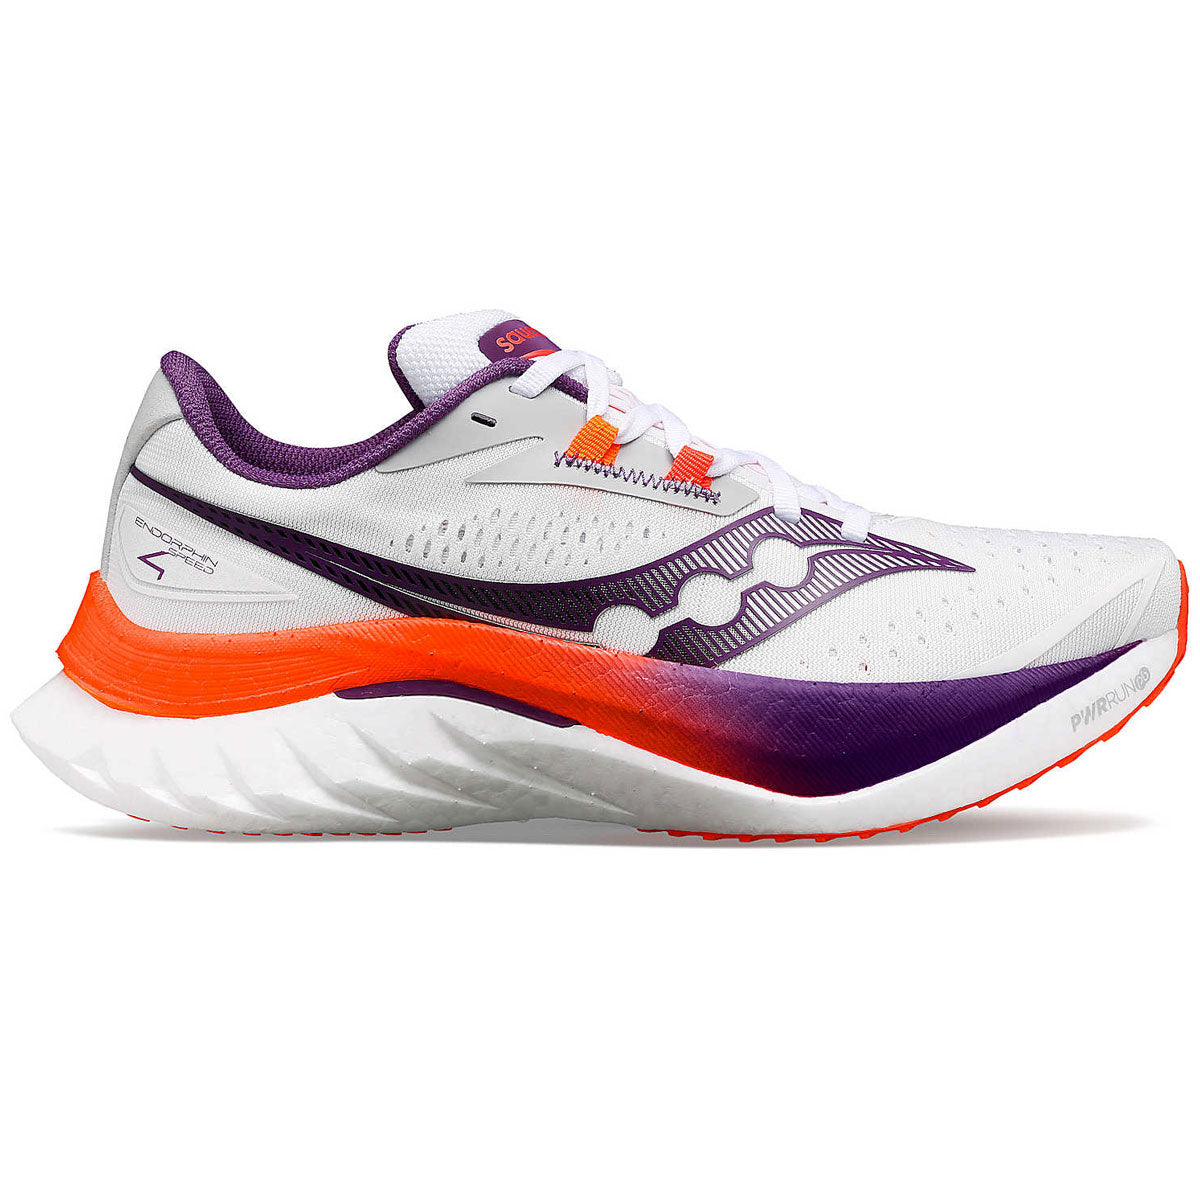 Saucony Endorphin Speed 4 Running Shoes - Womens - White/Violet